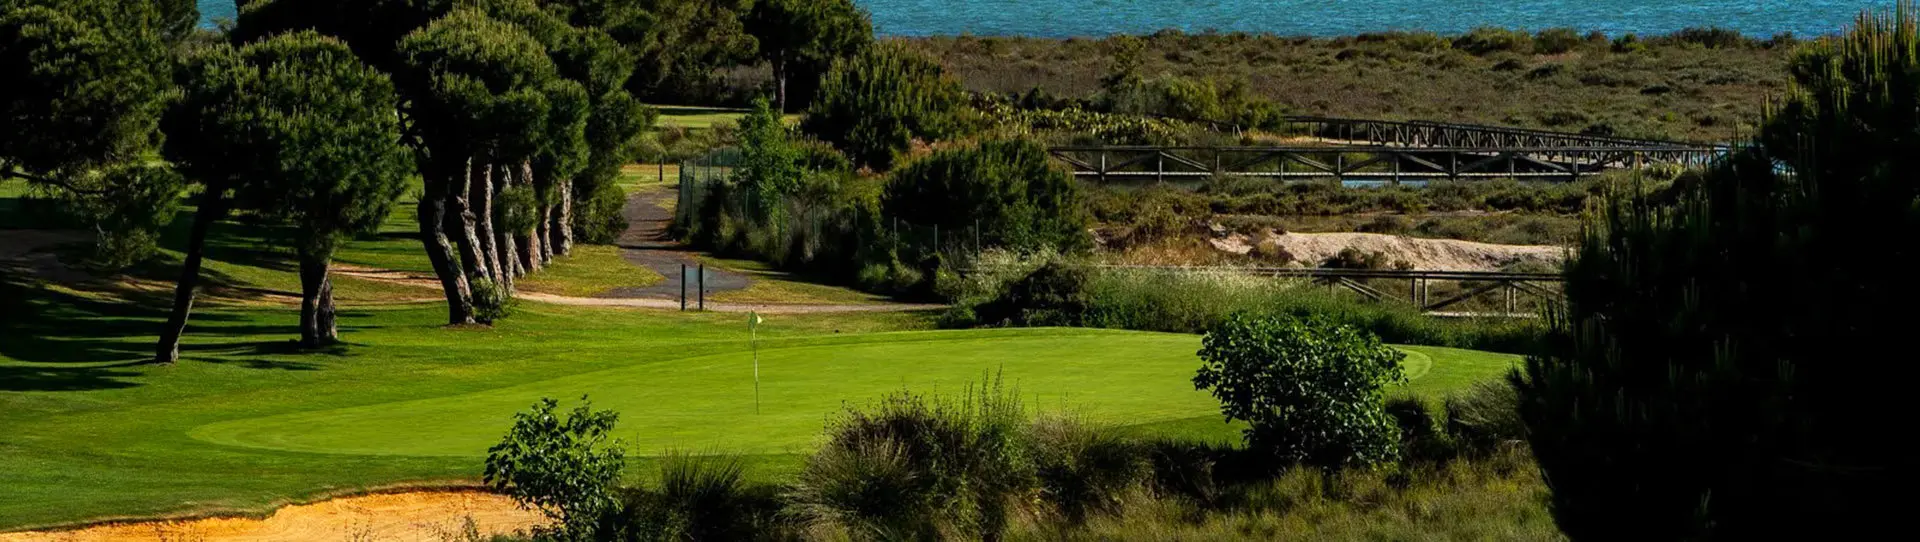 Spain golf holidays - El Rompido Two Rounds Package - Photo 2